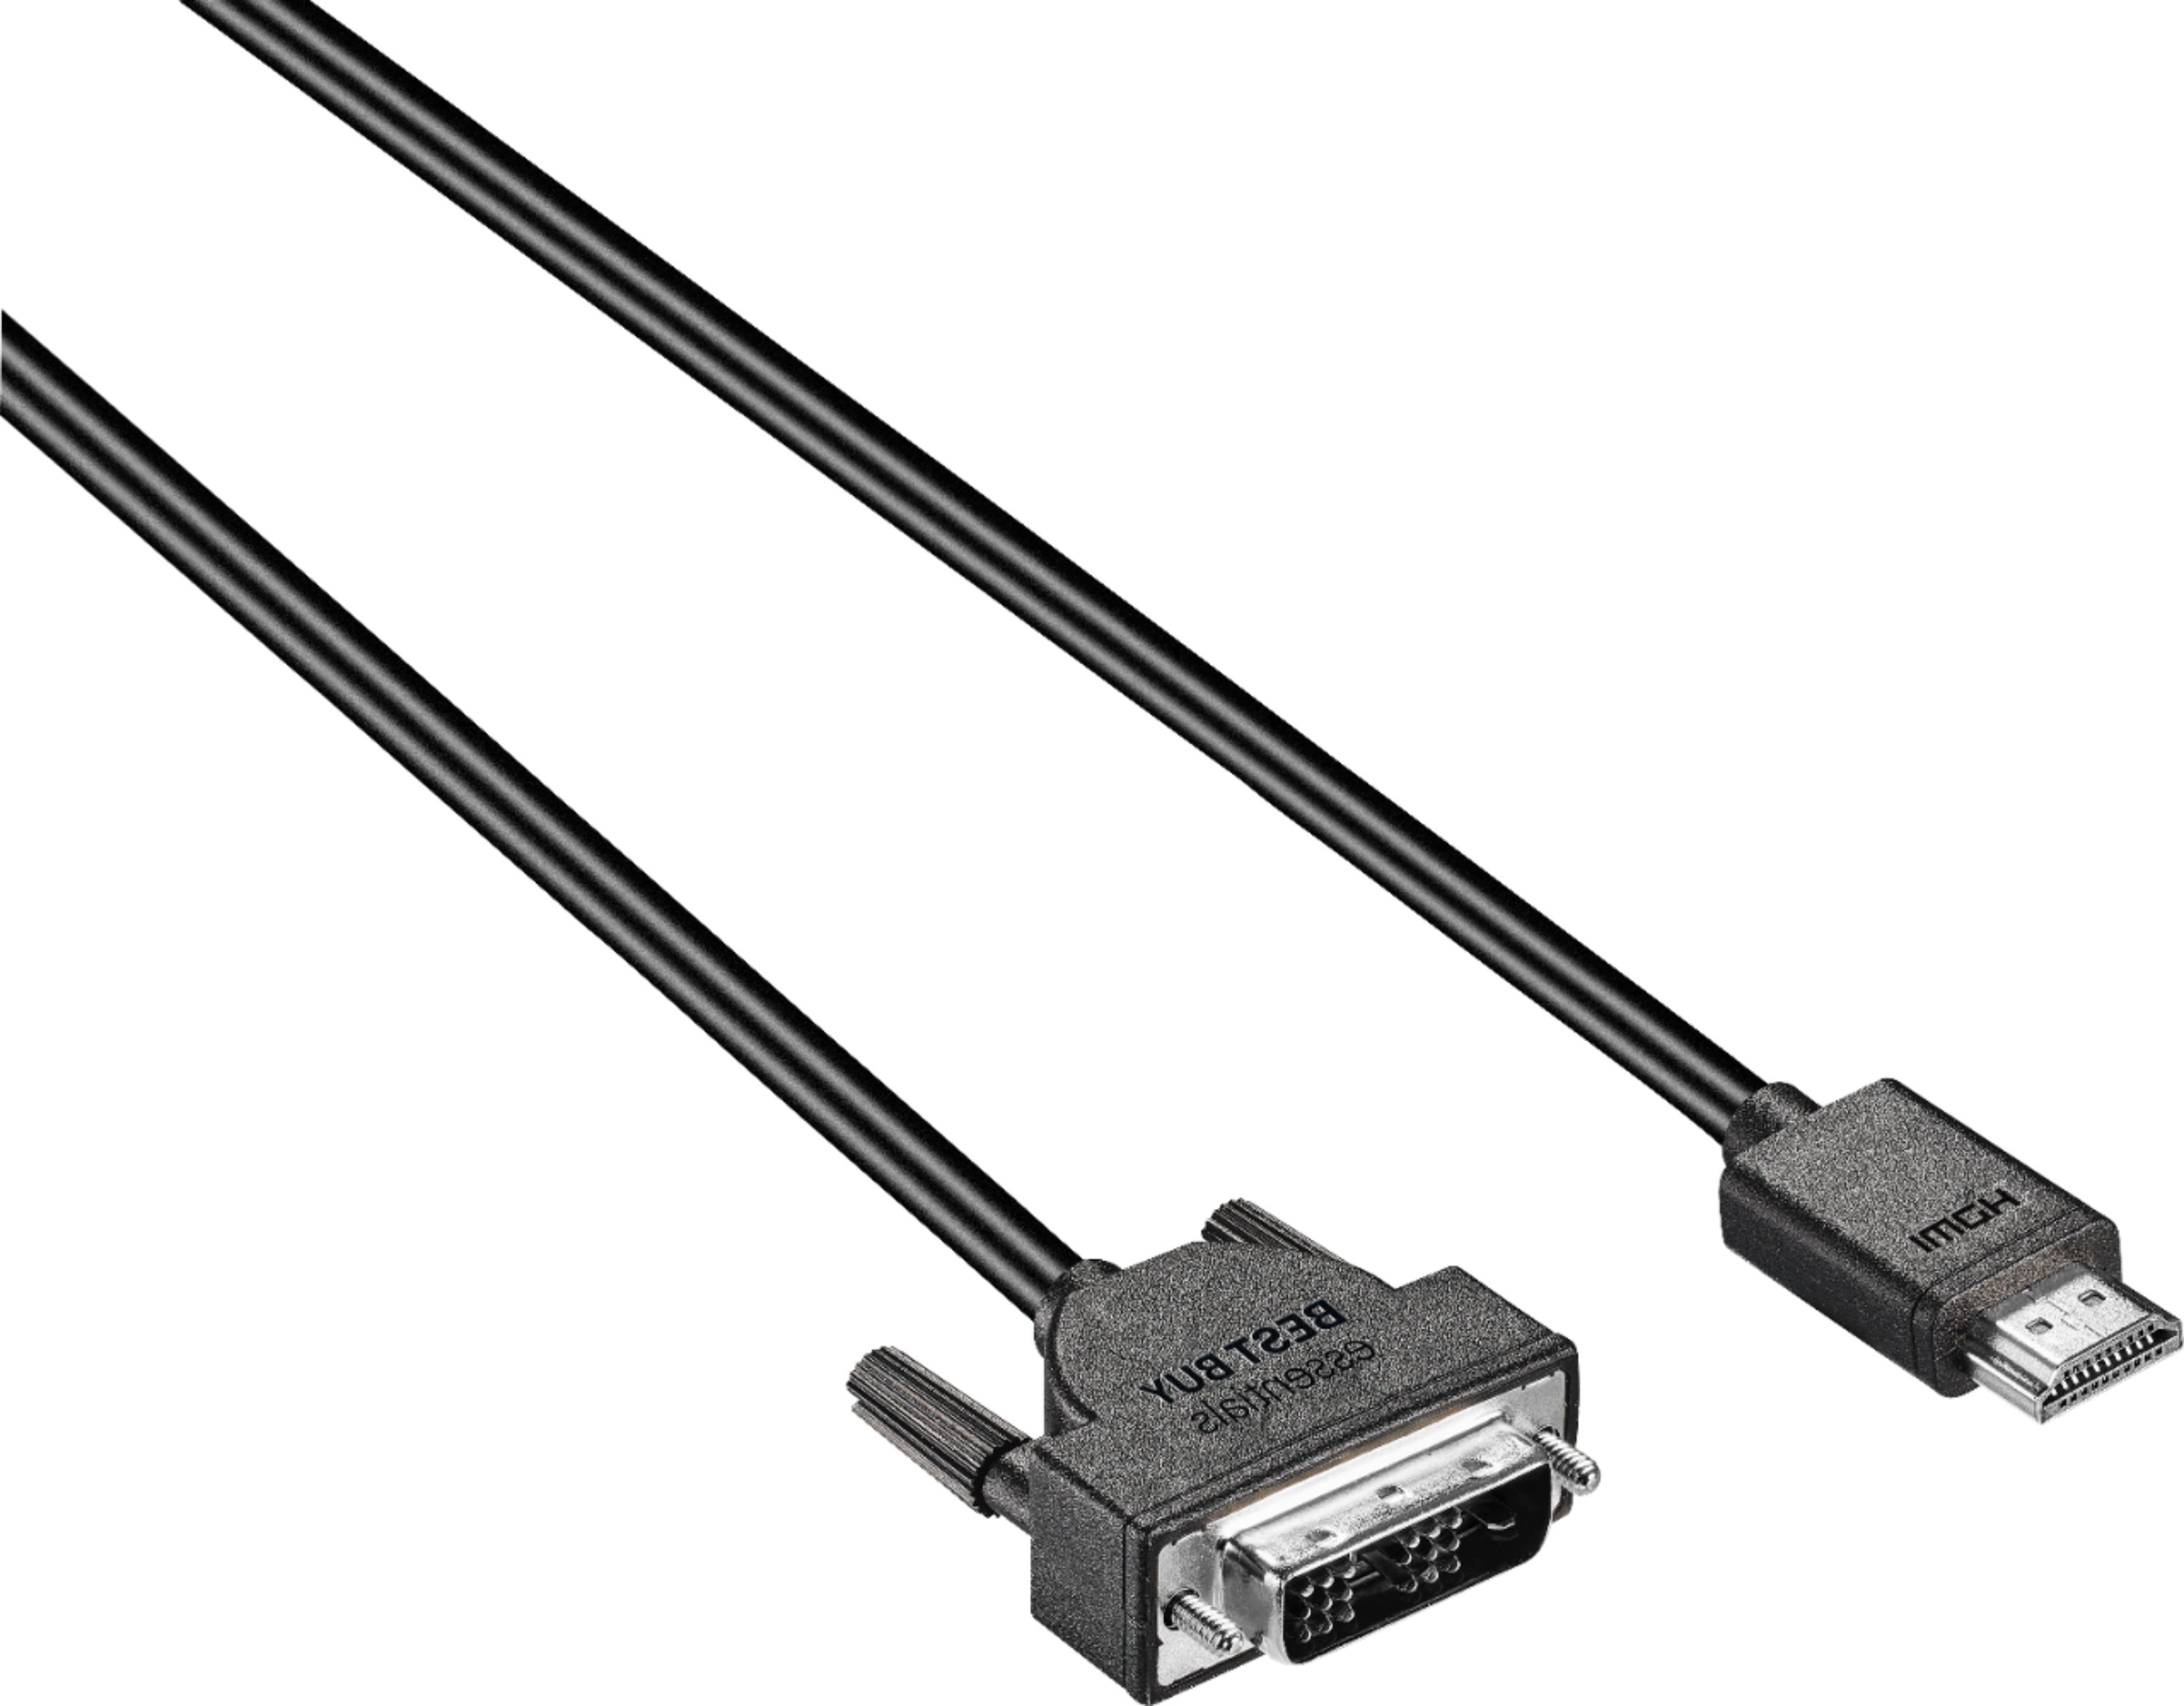 vga to hdmi cable - Best Buy